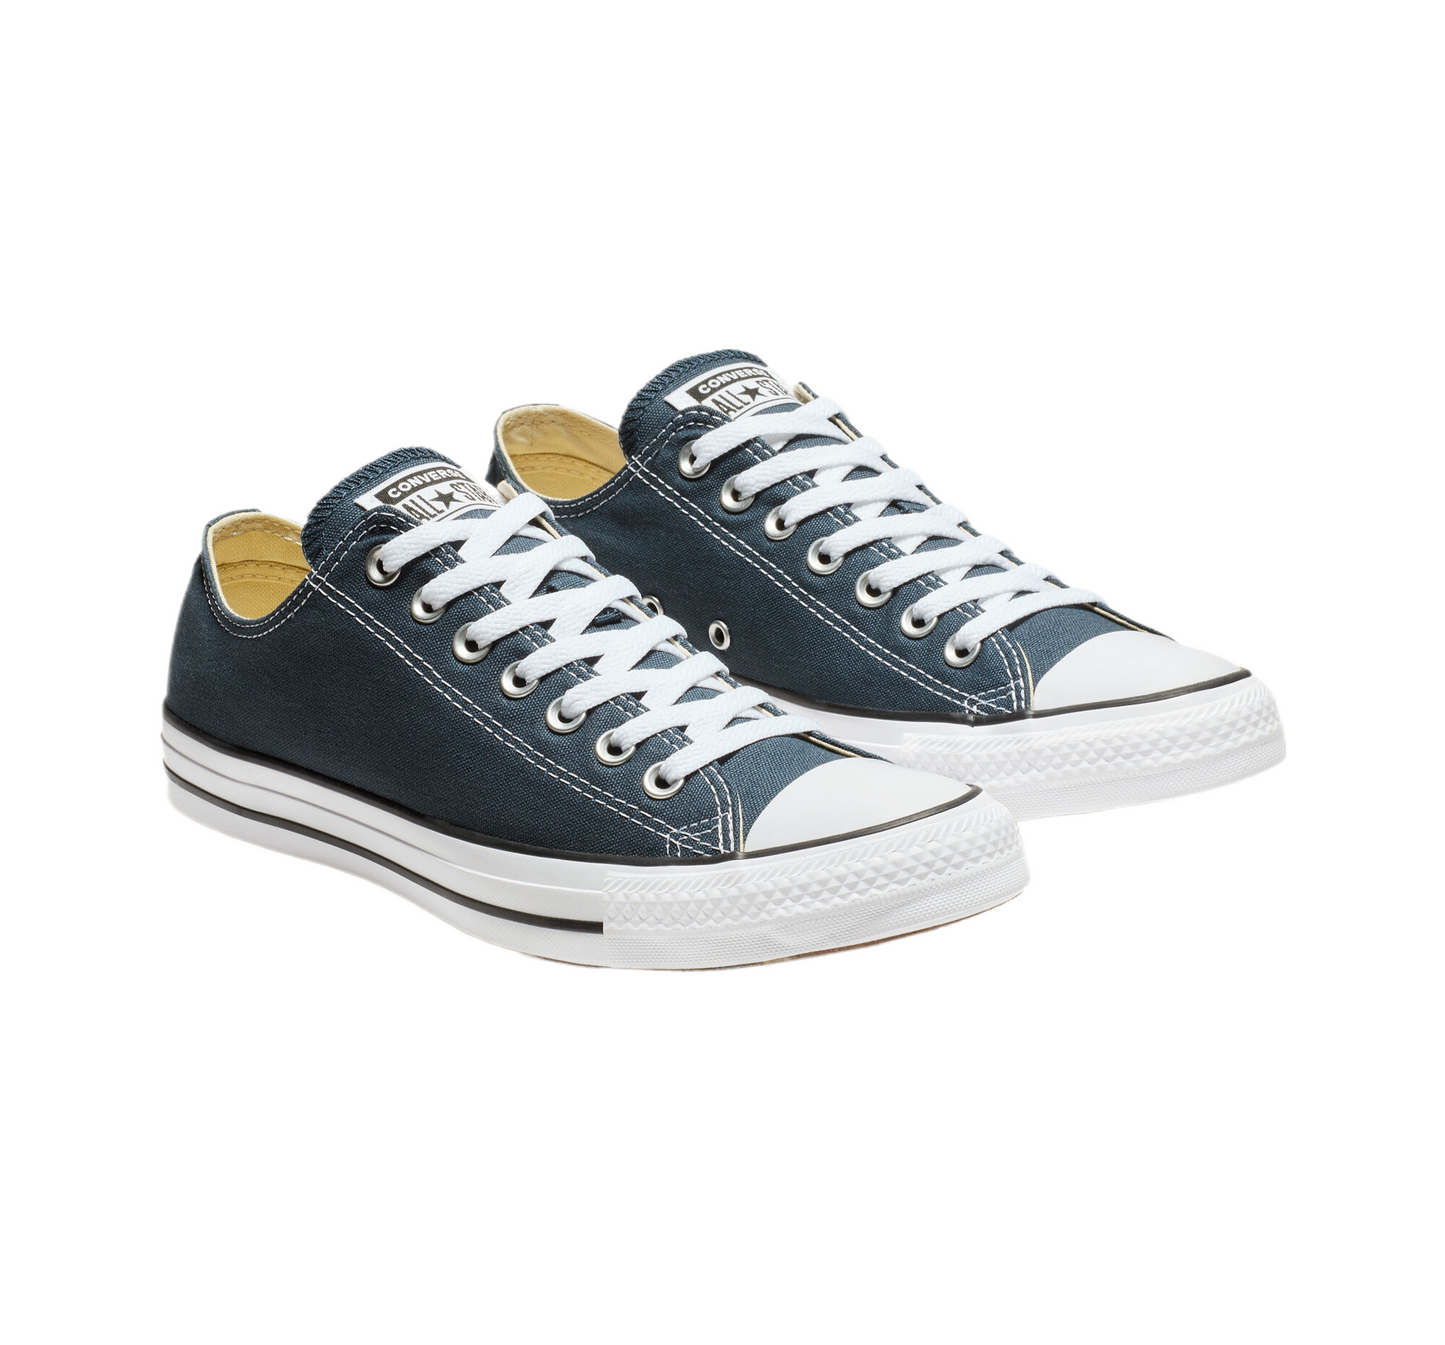 Converse Adult Unisex Chuck Taylor All Star Ox Navy Shoe M9697